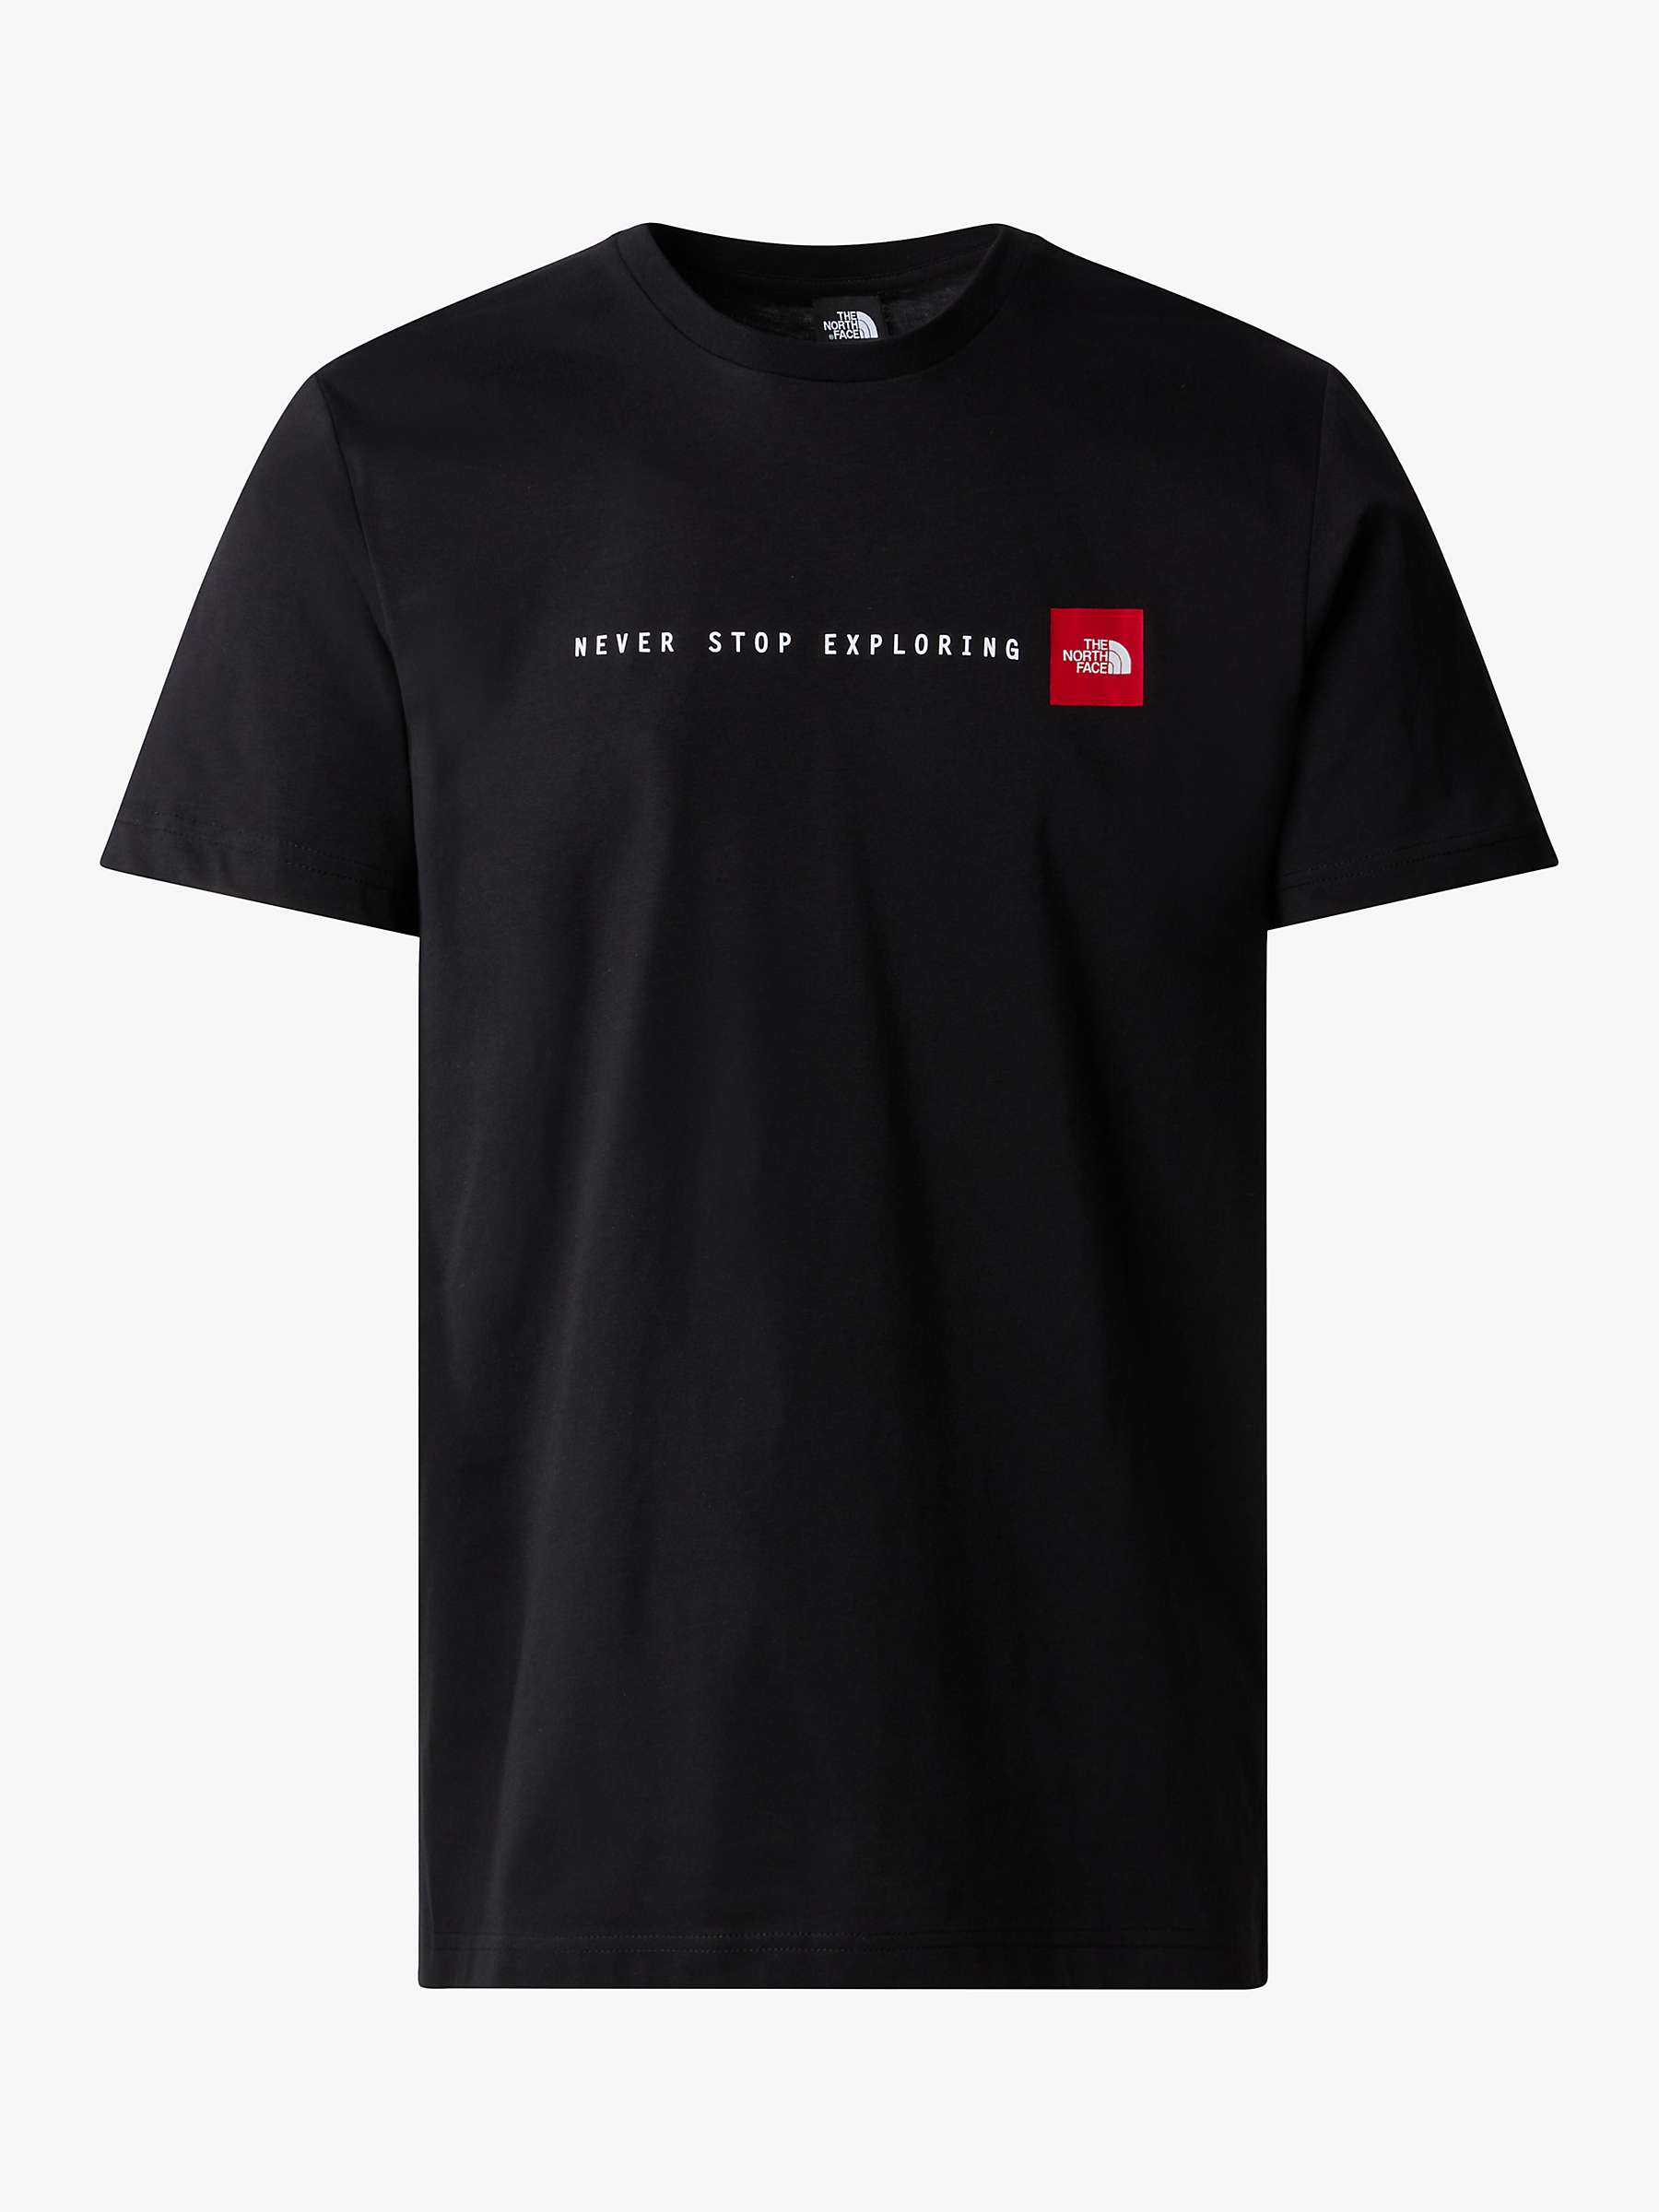 Buy The North Face Short Sleeve Never Stop Exploring T-Shirt Online at johnlewis.com